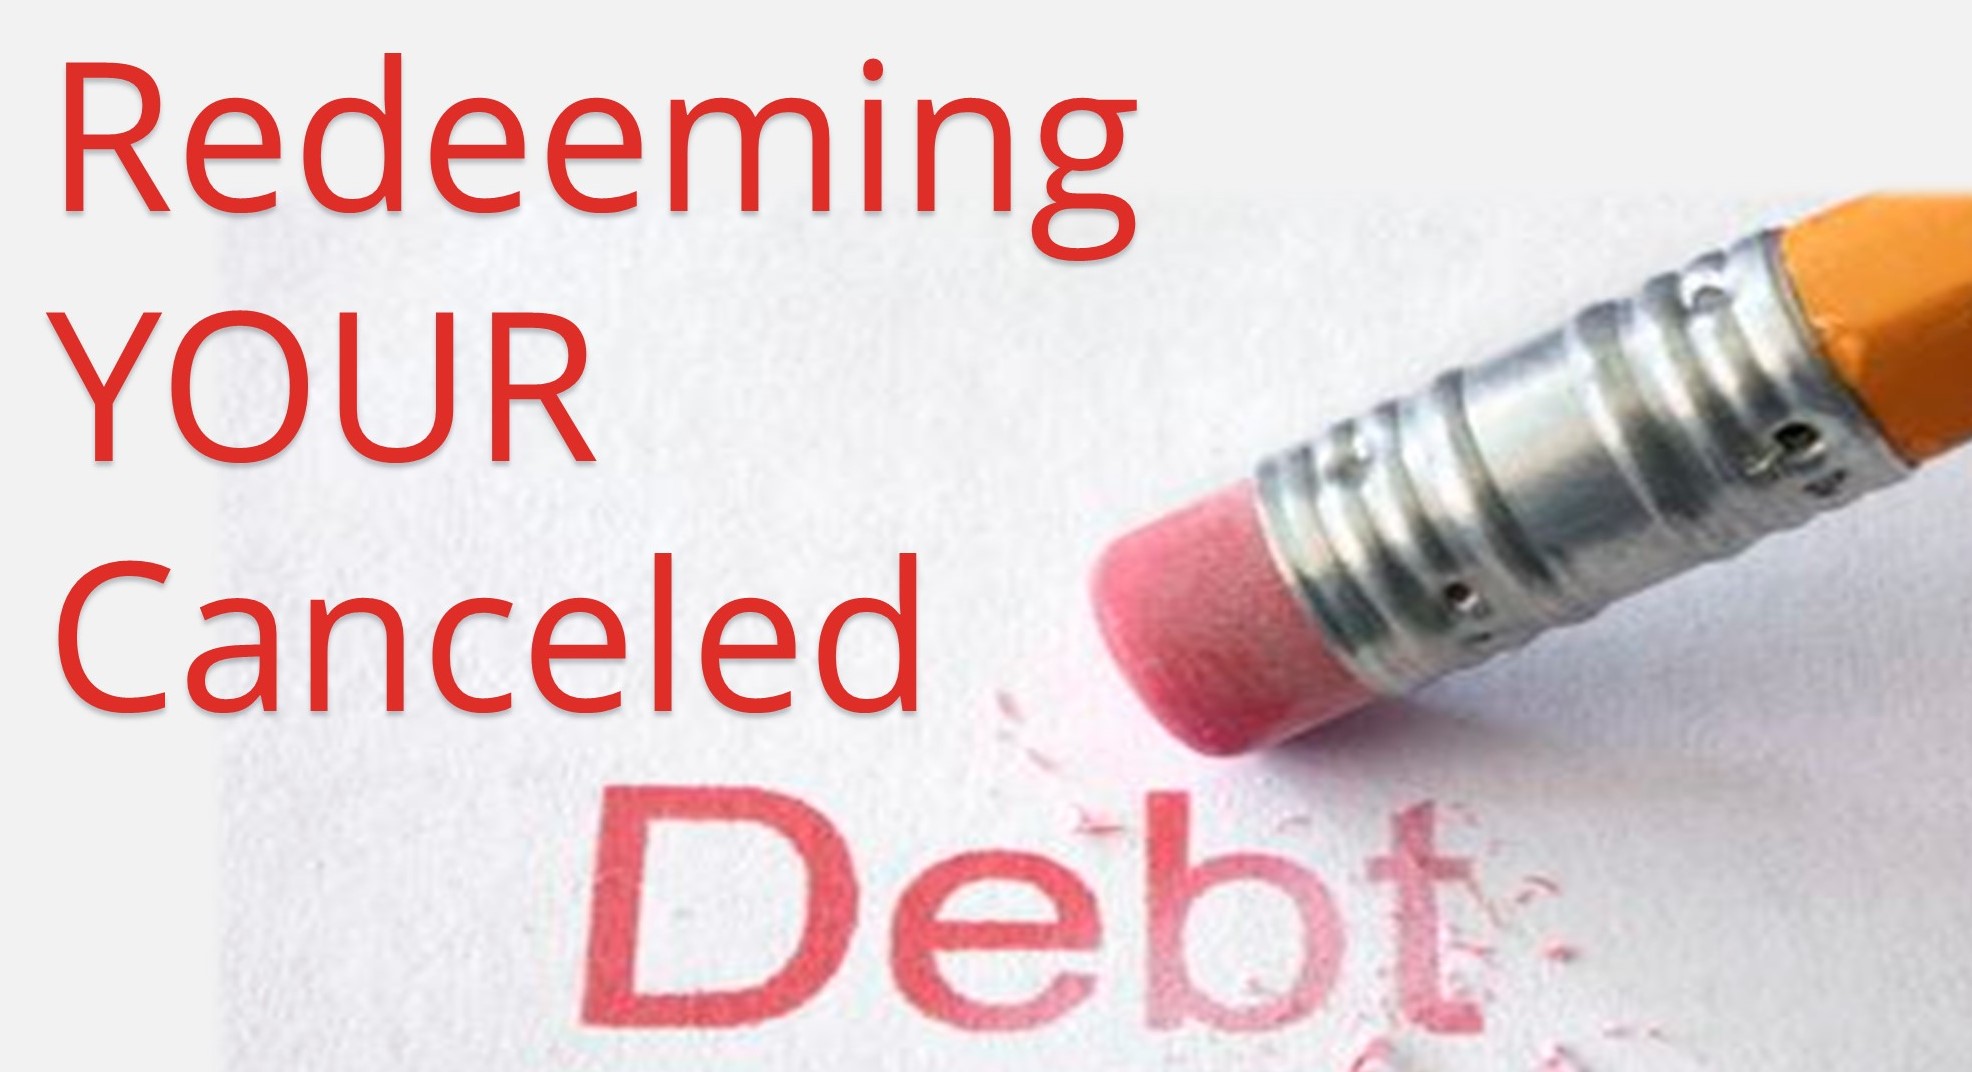 You are currently viewing Redeeming YOUR Cancelled Debt – October 17th